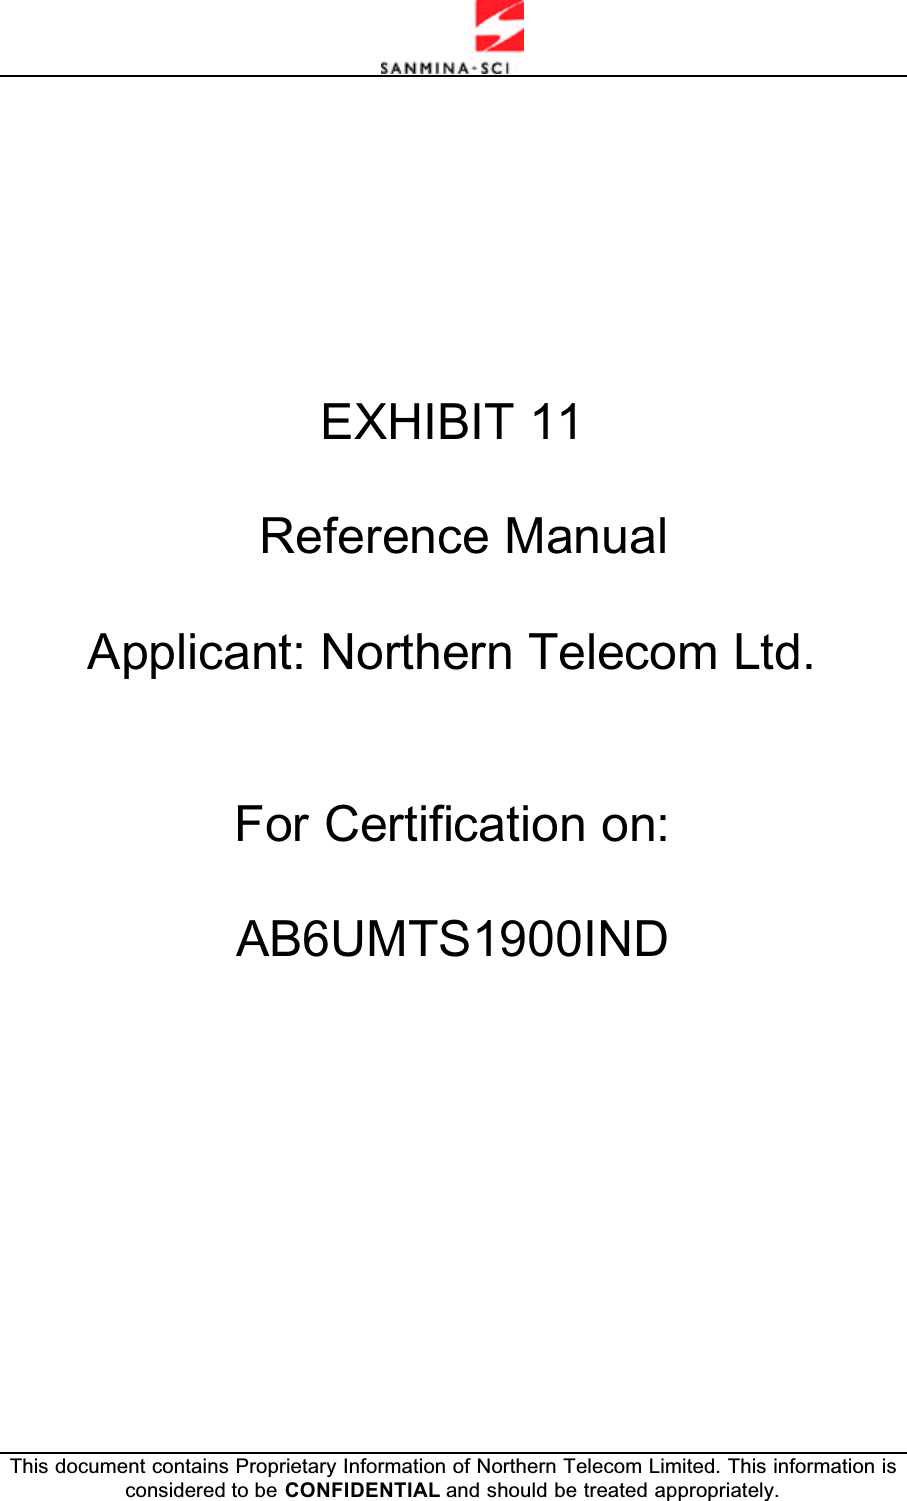 This document contains Proprietary Information of Northern Telecom Limited. This information is considered to be CONFIDENTIAL and should be treated appropriately.EXHIBIT 11    Reference Manual Applicant: Northern Telecom Ltd.For Certification on:AB6UMTS1900IND